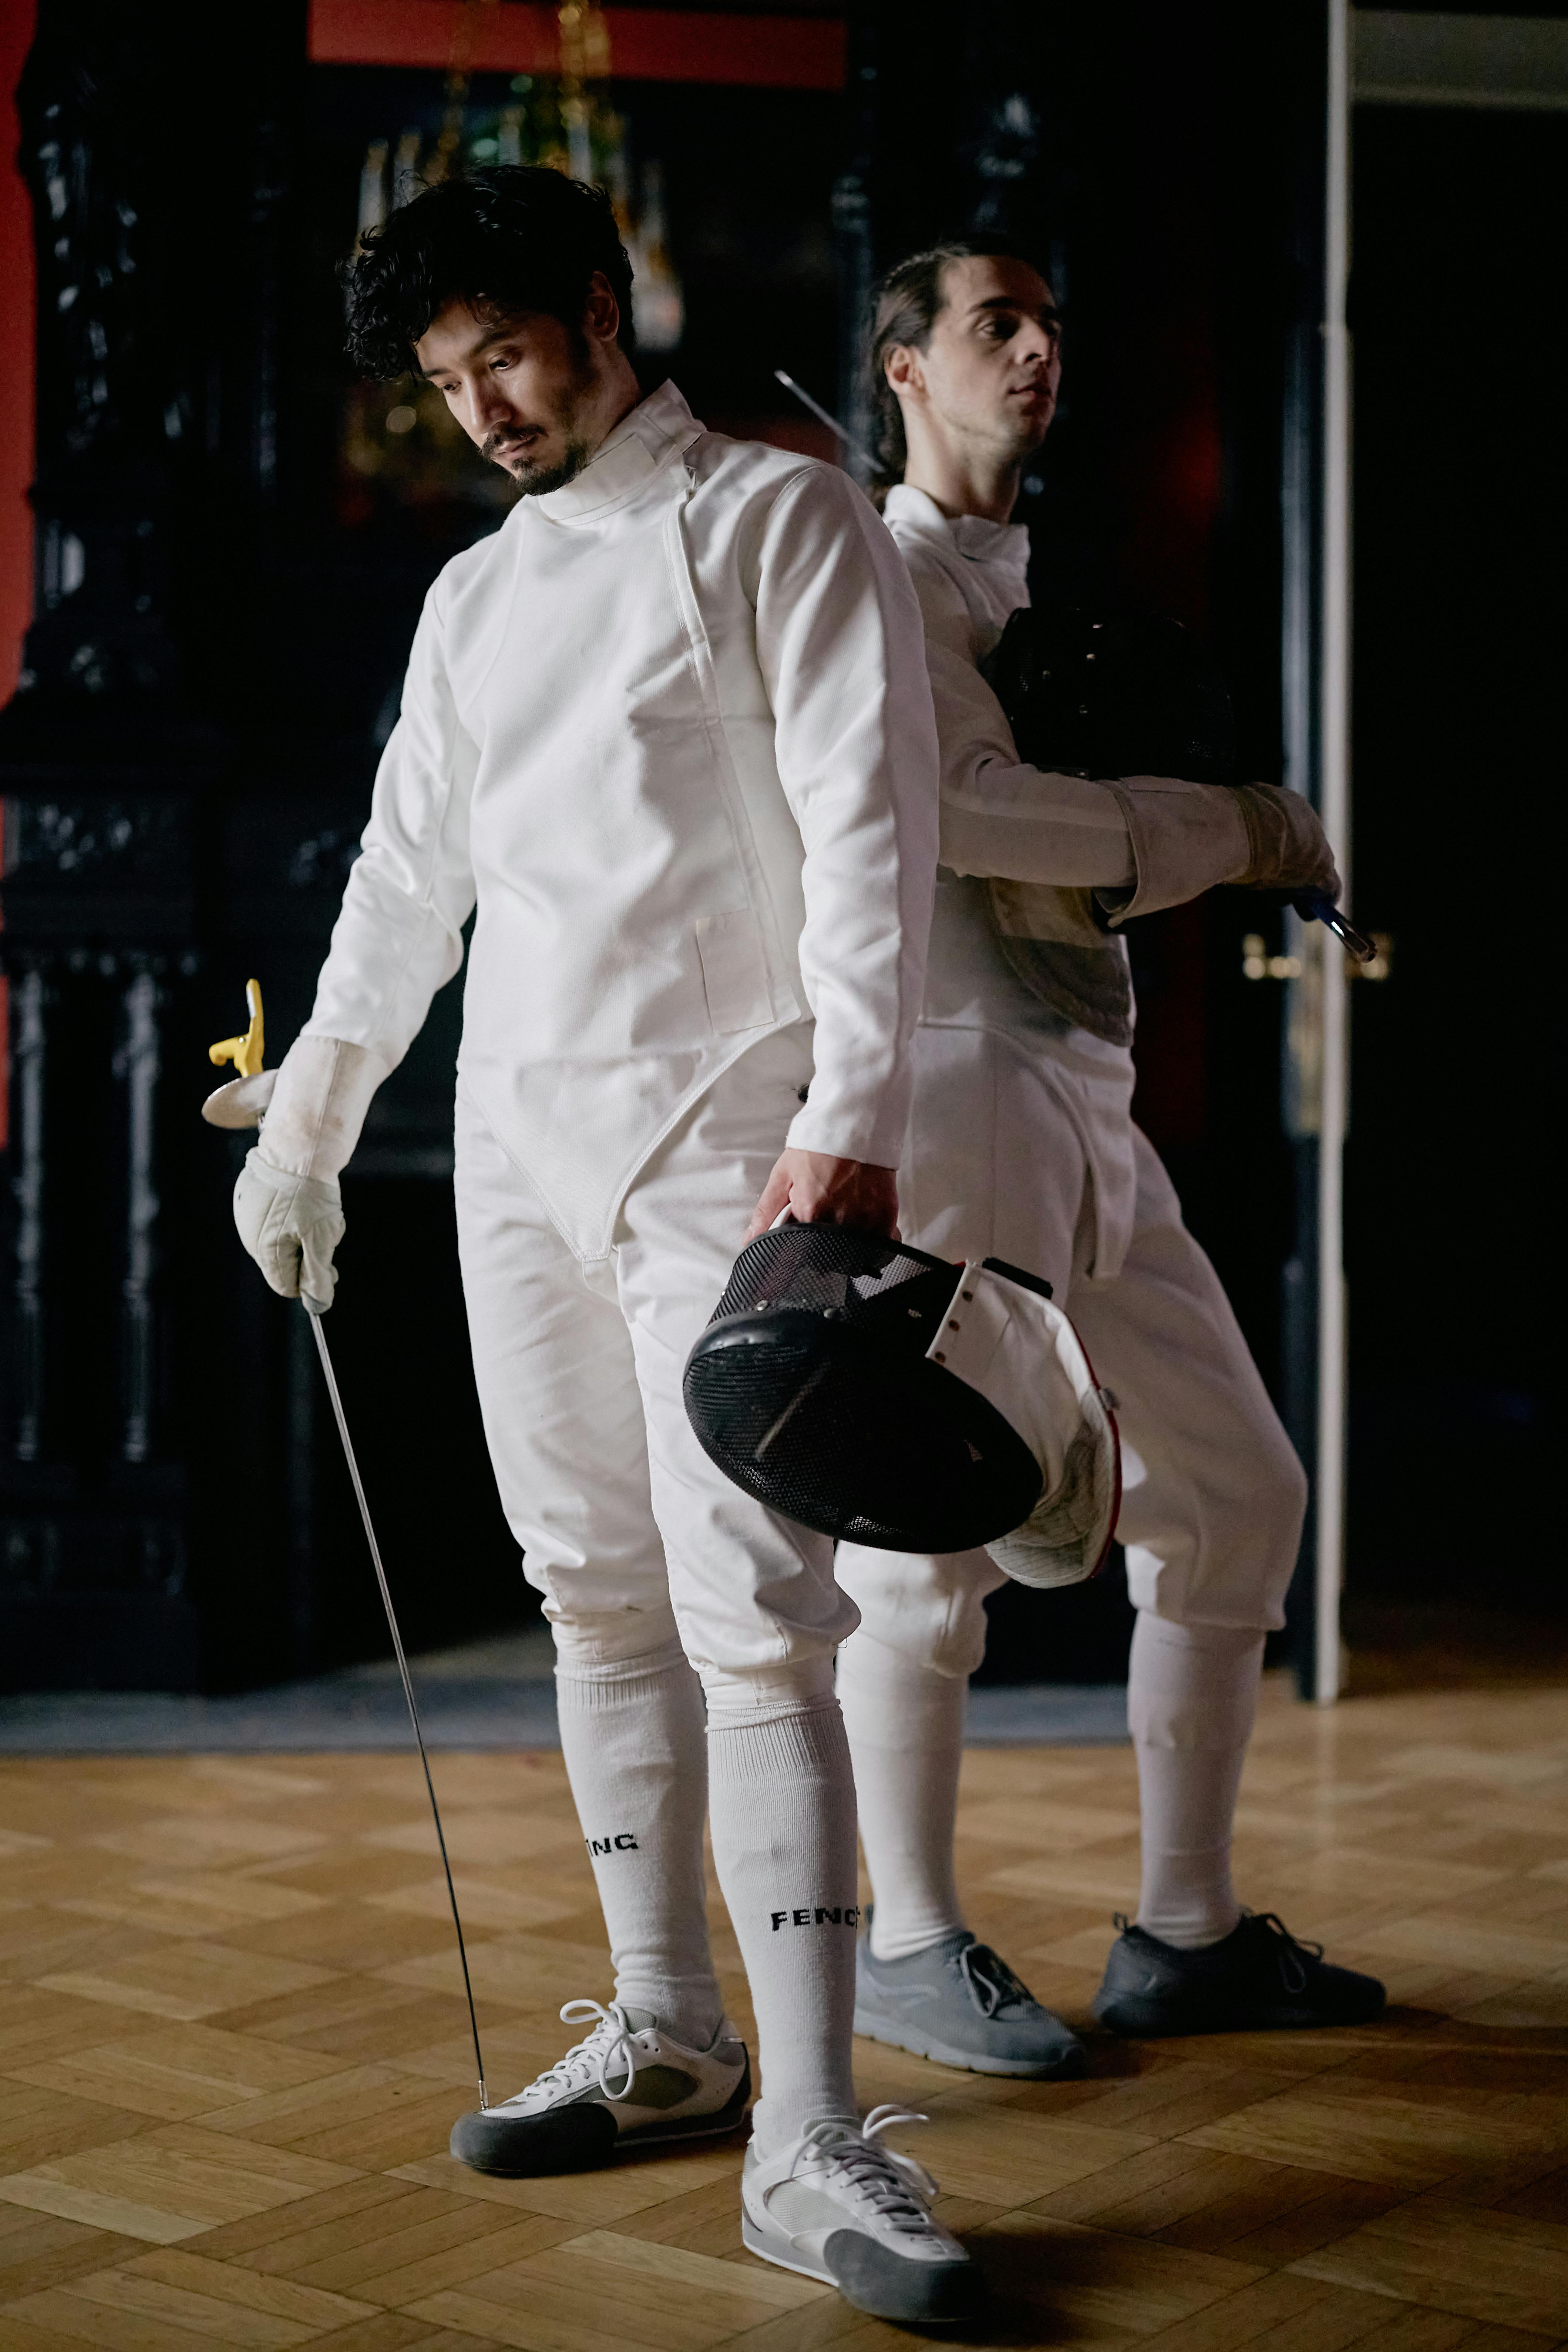 Fencing Outfit Photos, Download The BEST Free Fencing Outfit Stock Photos &  HD Images